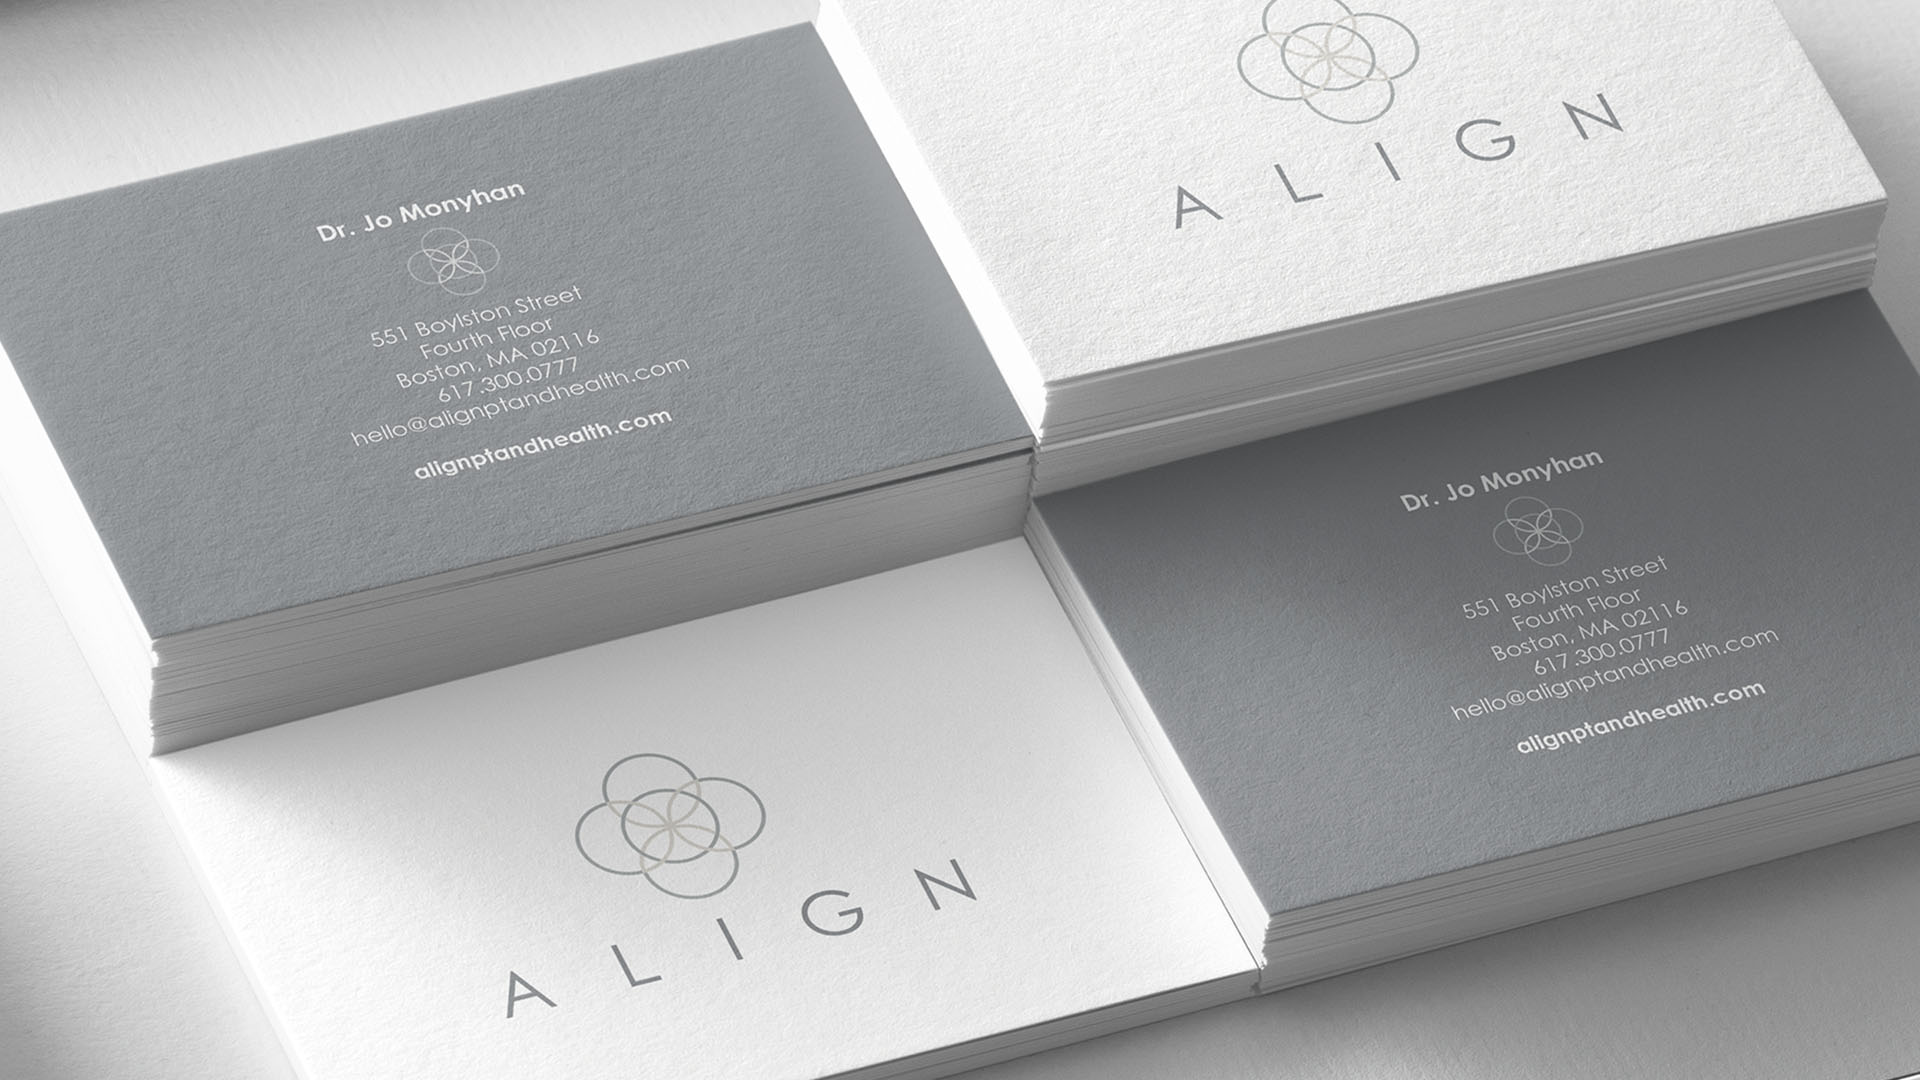 align business cards close up